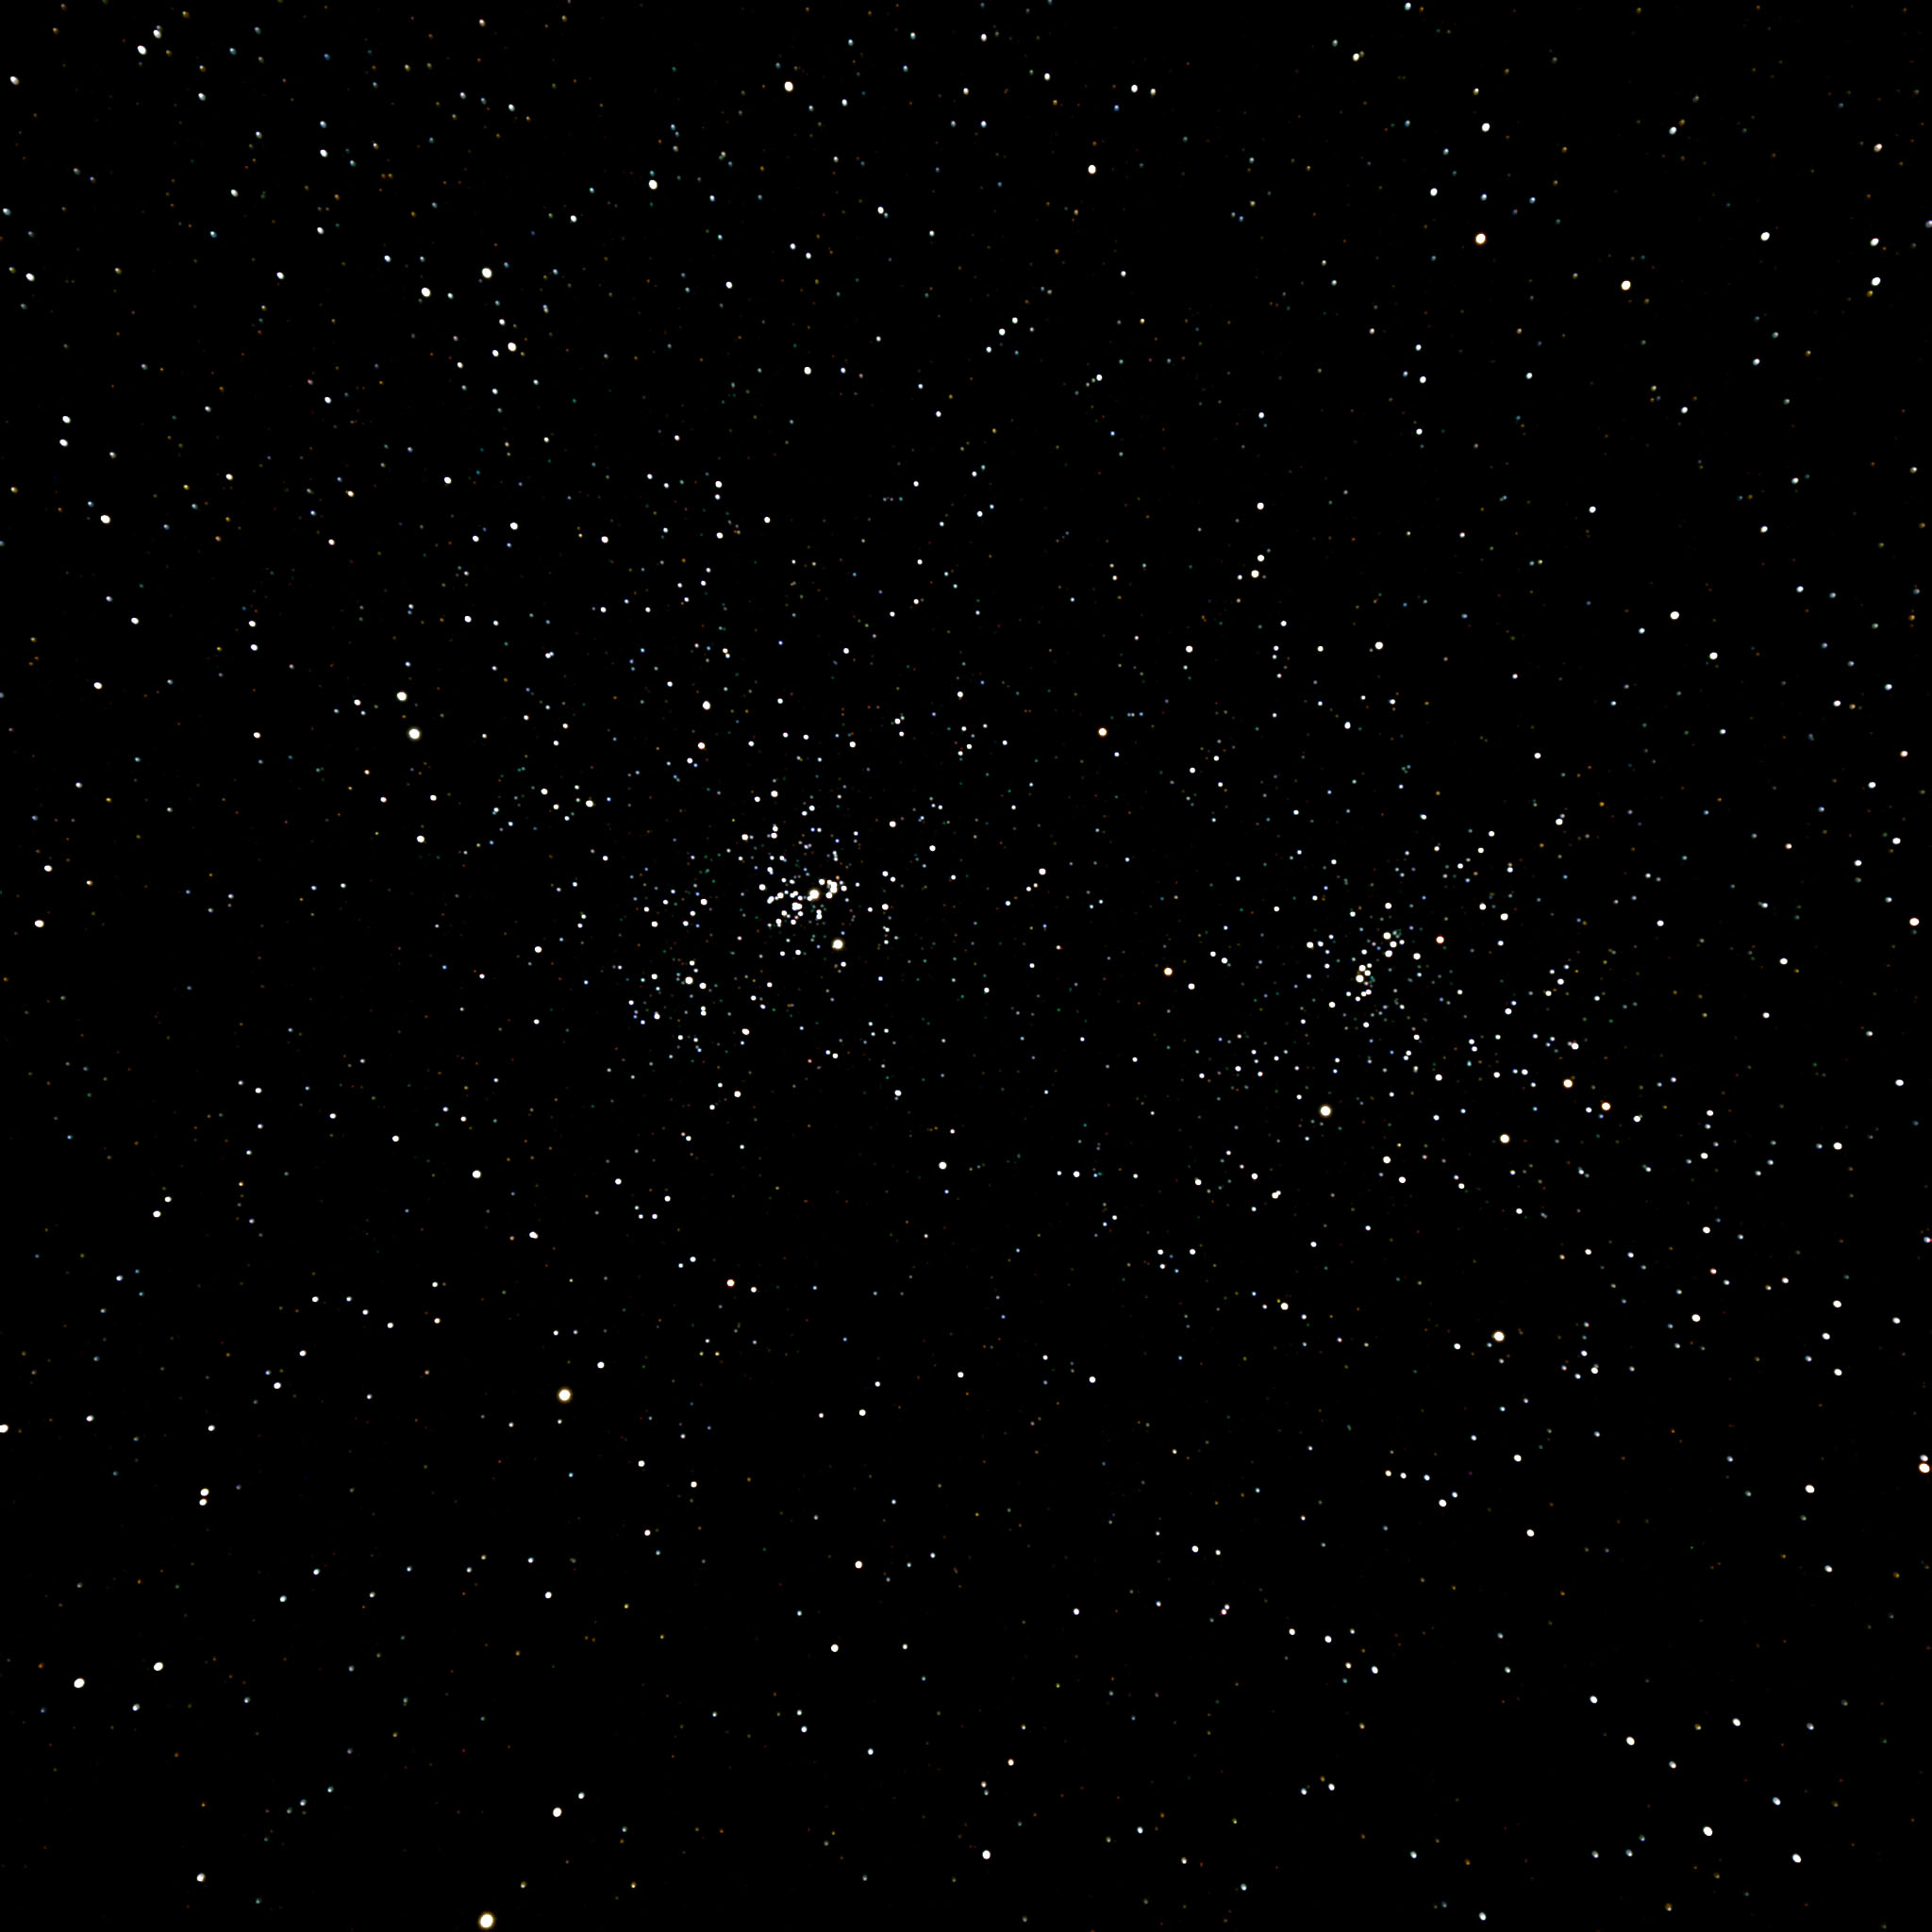 Free Download Dark Sky With Stars Wallpaper Images Pictures Becuo